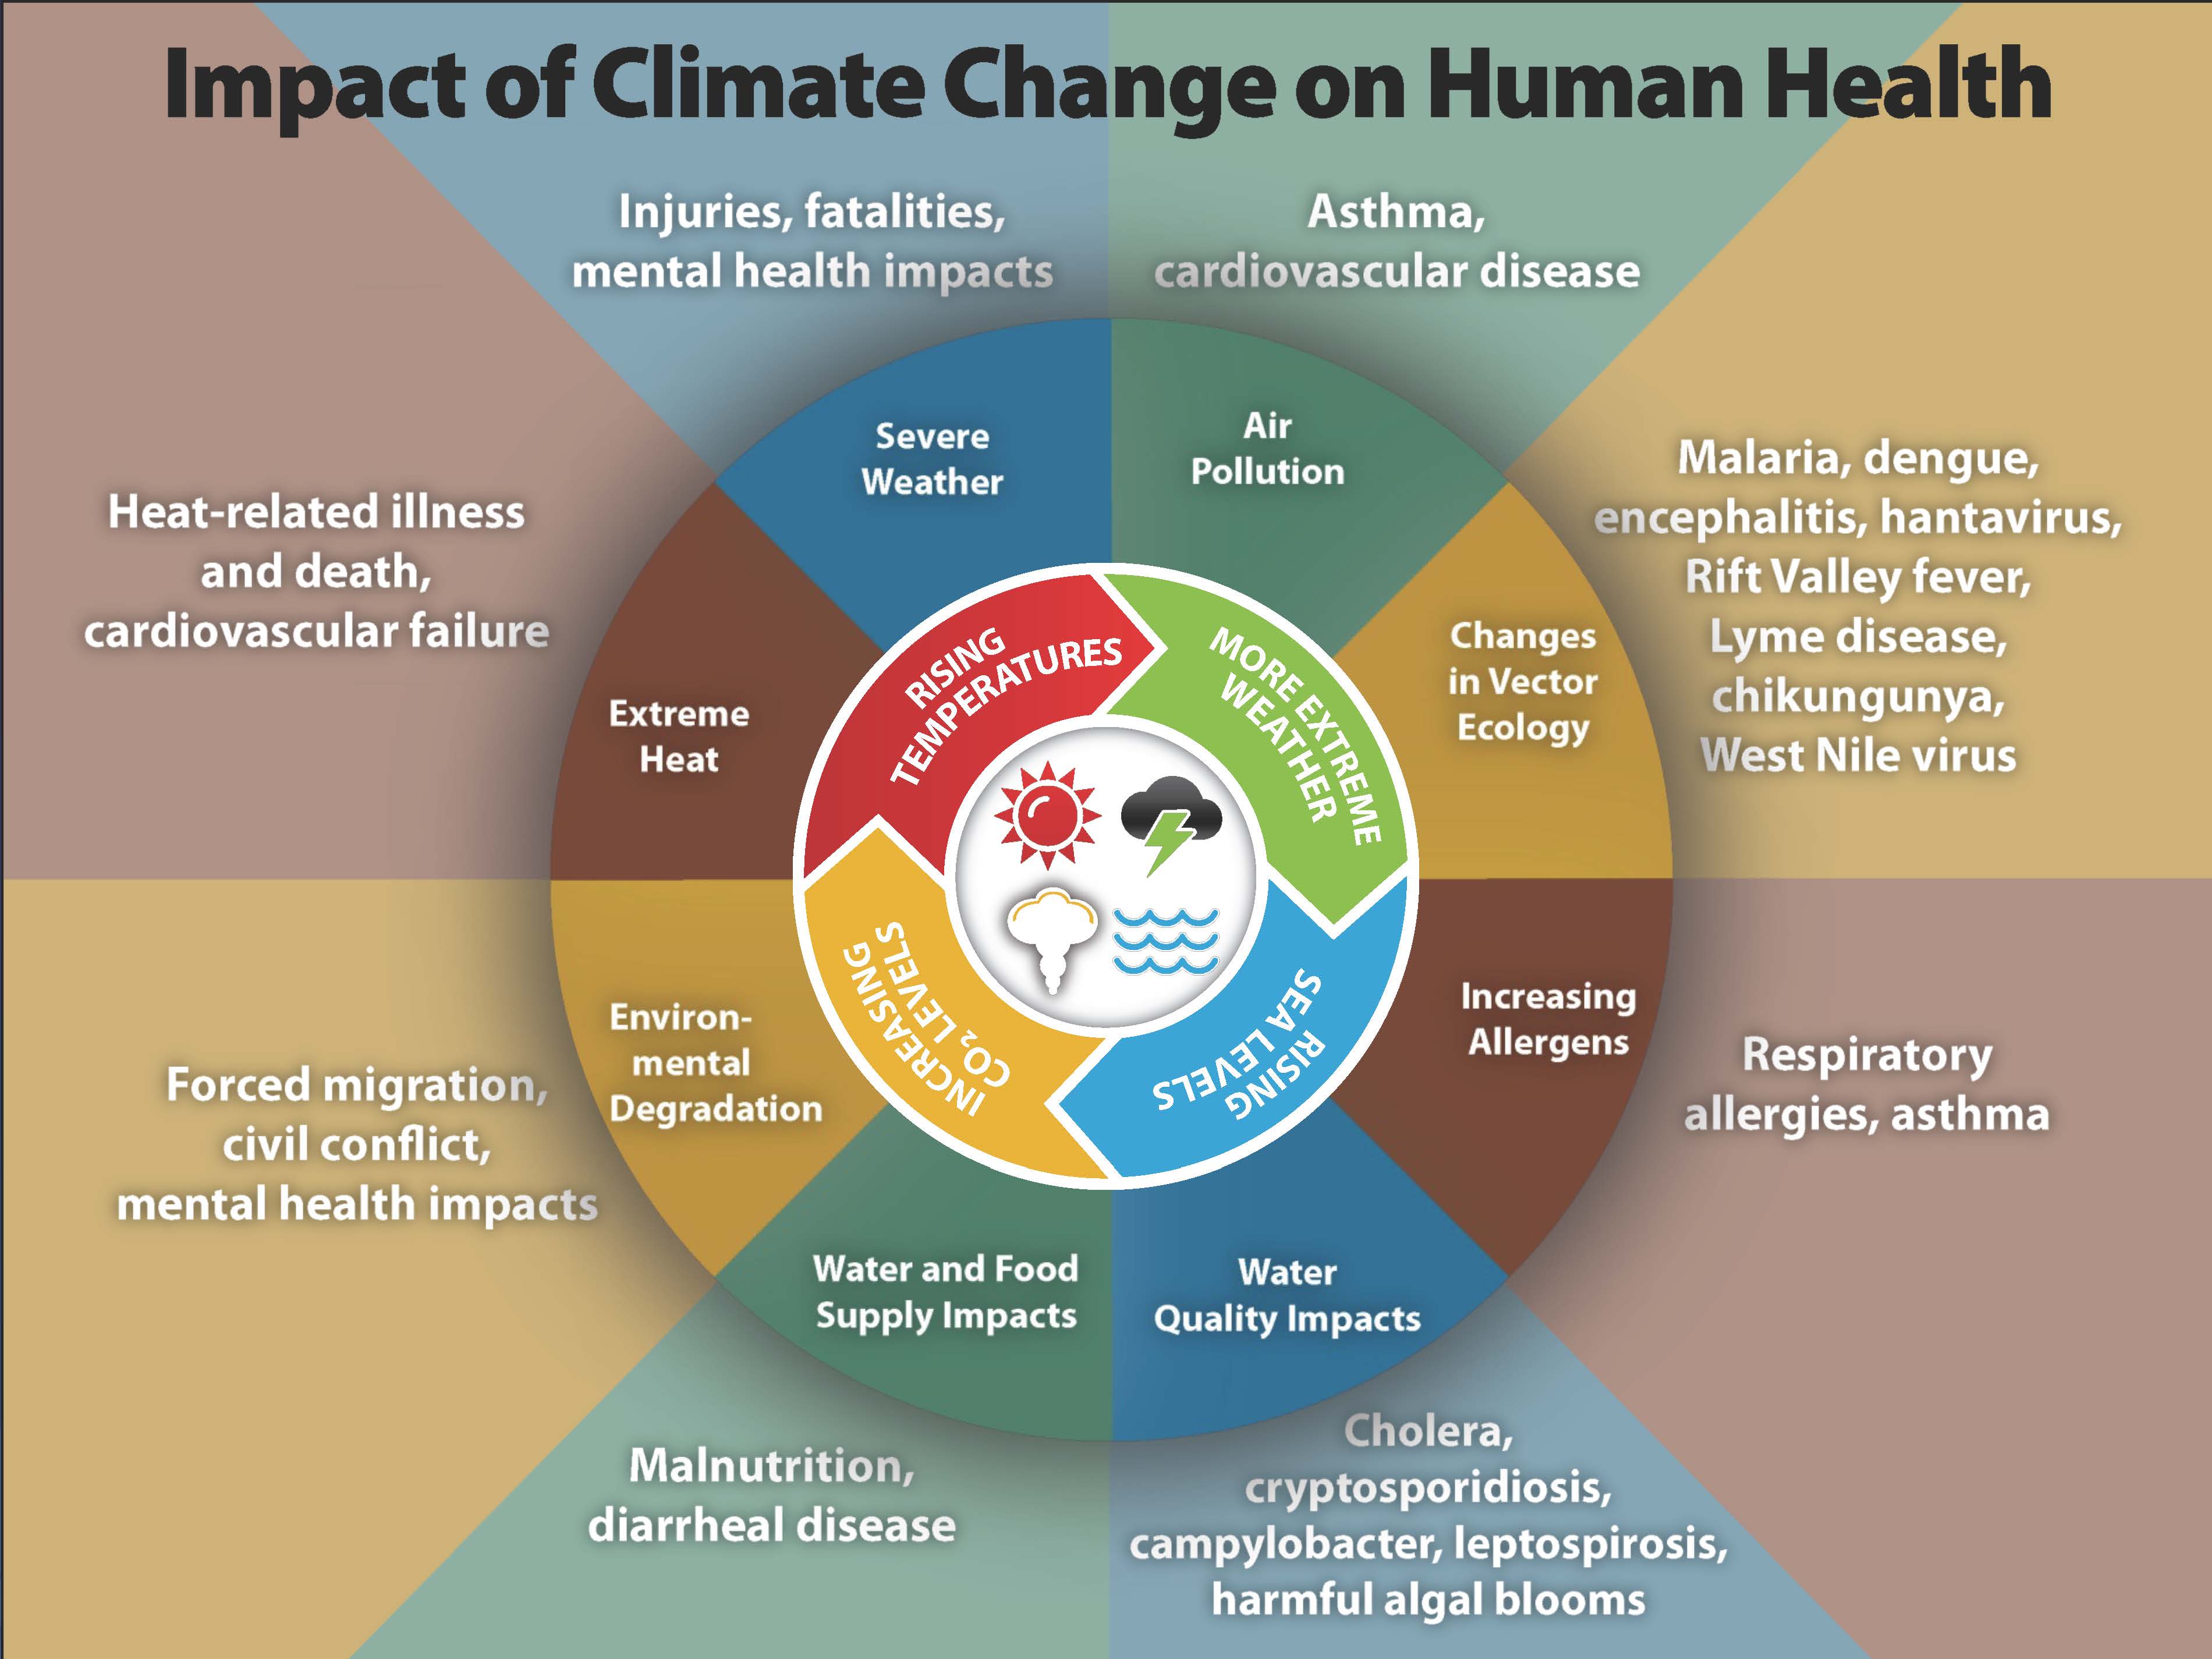 Impact of Climate Change on Human Health - Increased CO2 levels leads to rising temperatures which brings more extreme weather which makes sea levels rise. This leads to extreme heat, severe weather, air pollution, changes in vector ecology, increasing allergens, water quality impacts, water and food supply impacts, environmental degredation.